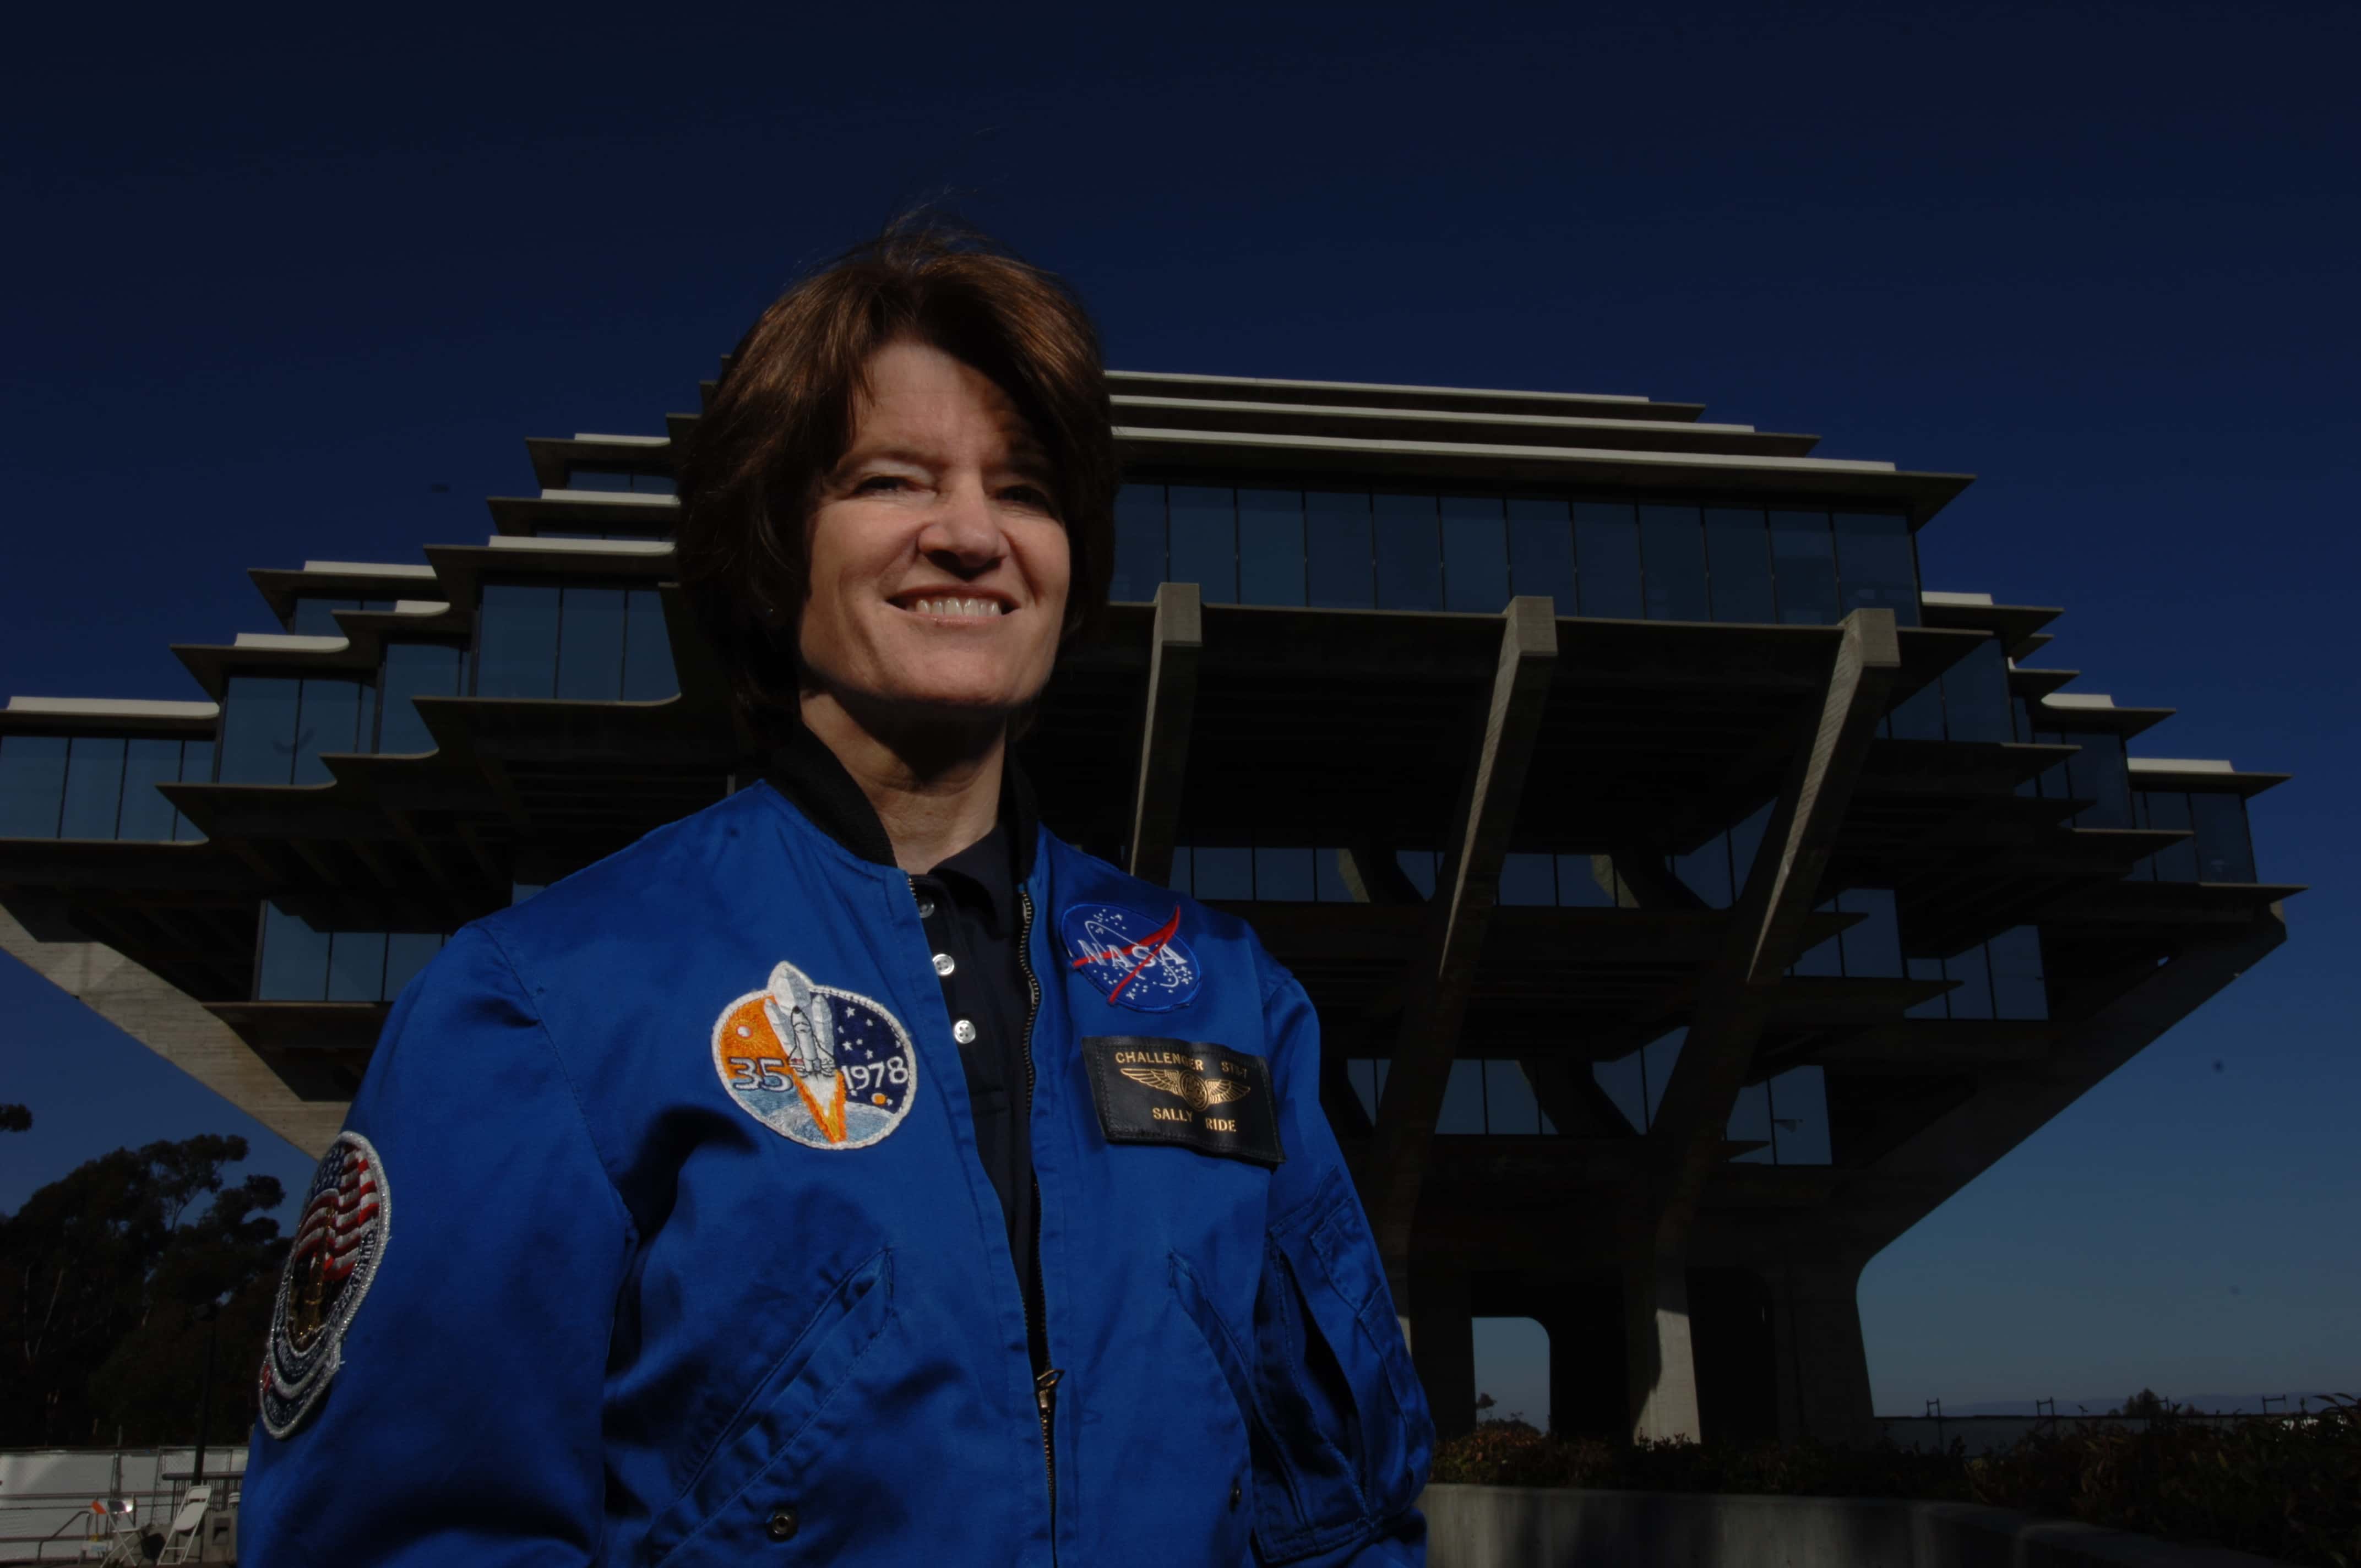 Sally Ride facts